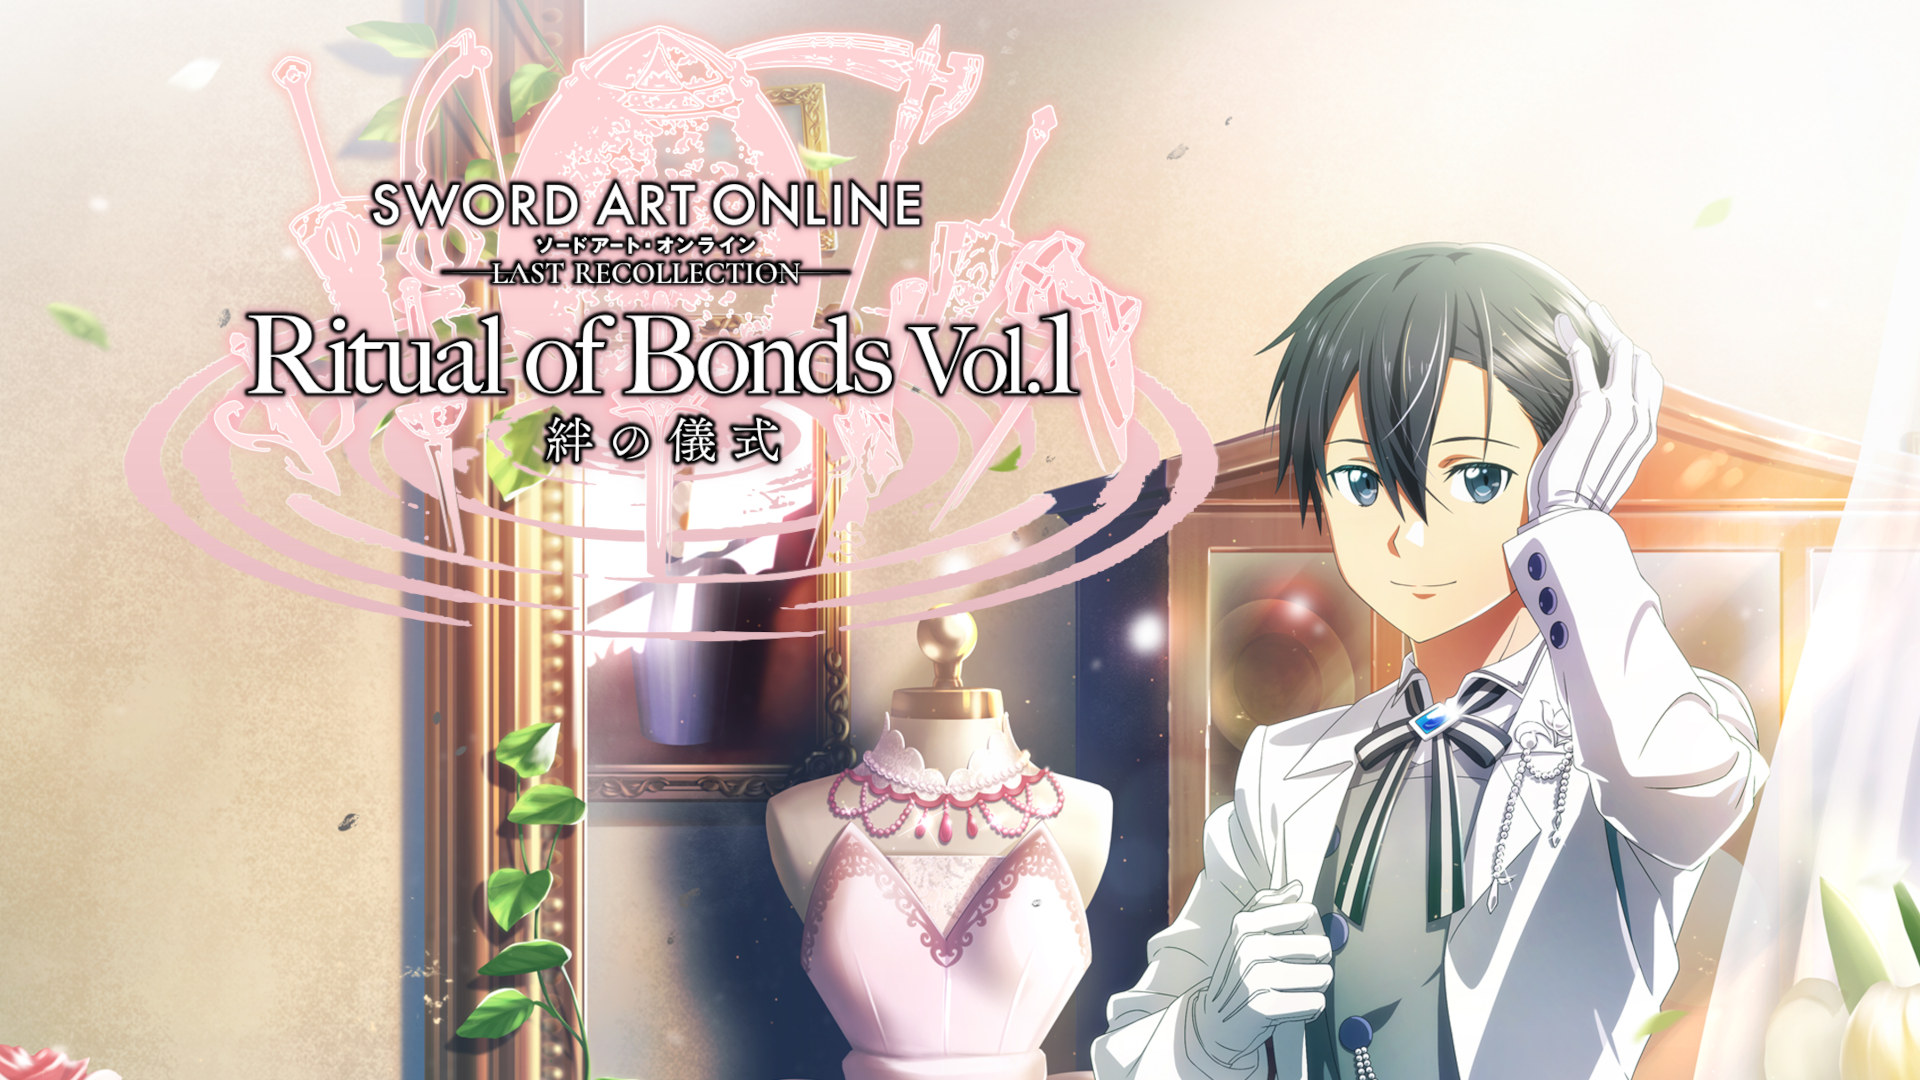 Bandai Namco Announces First DLC For Sword Art Online Last Recollection